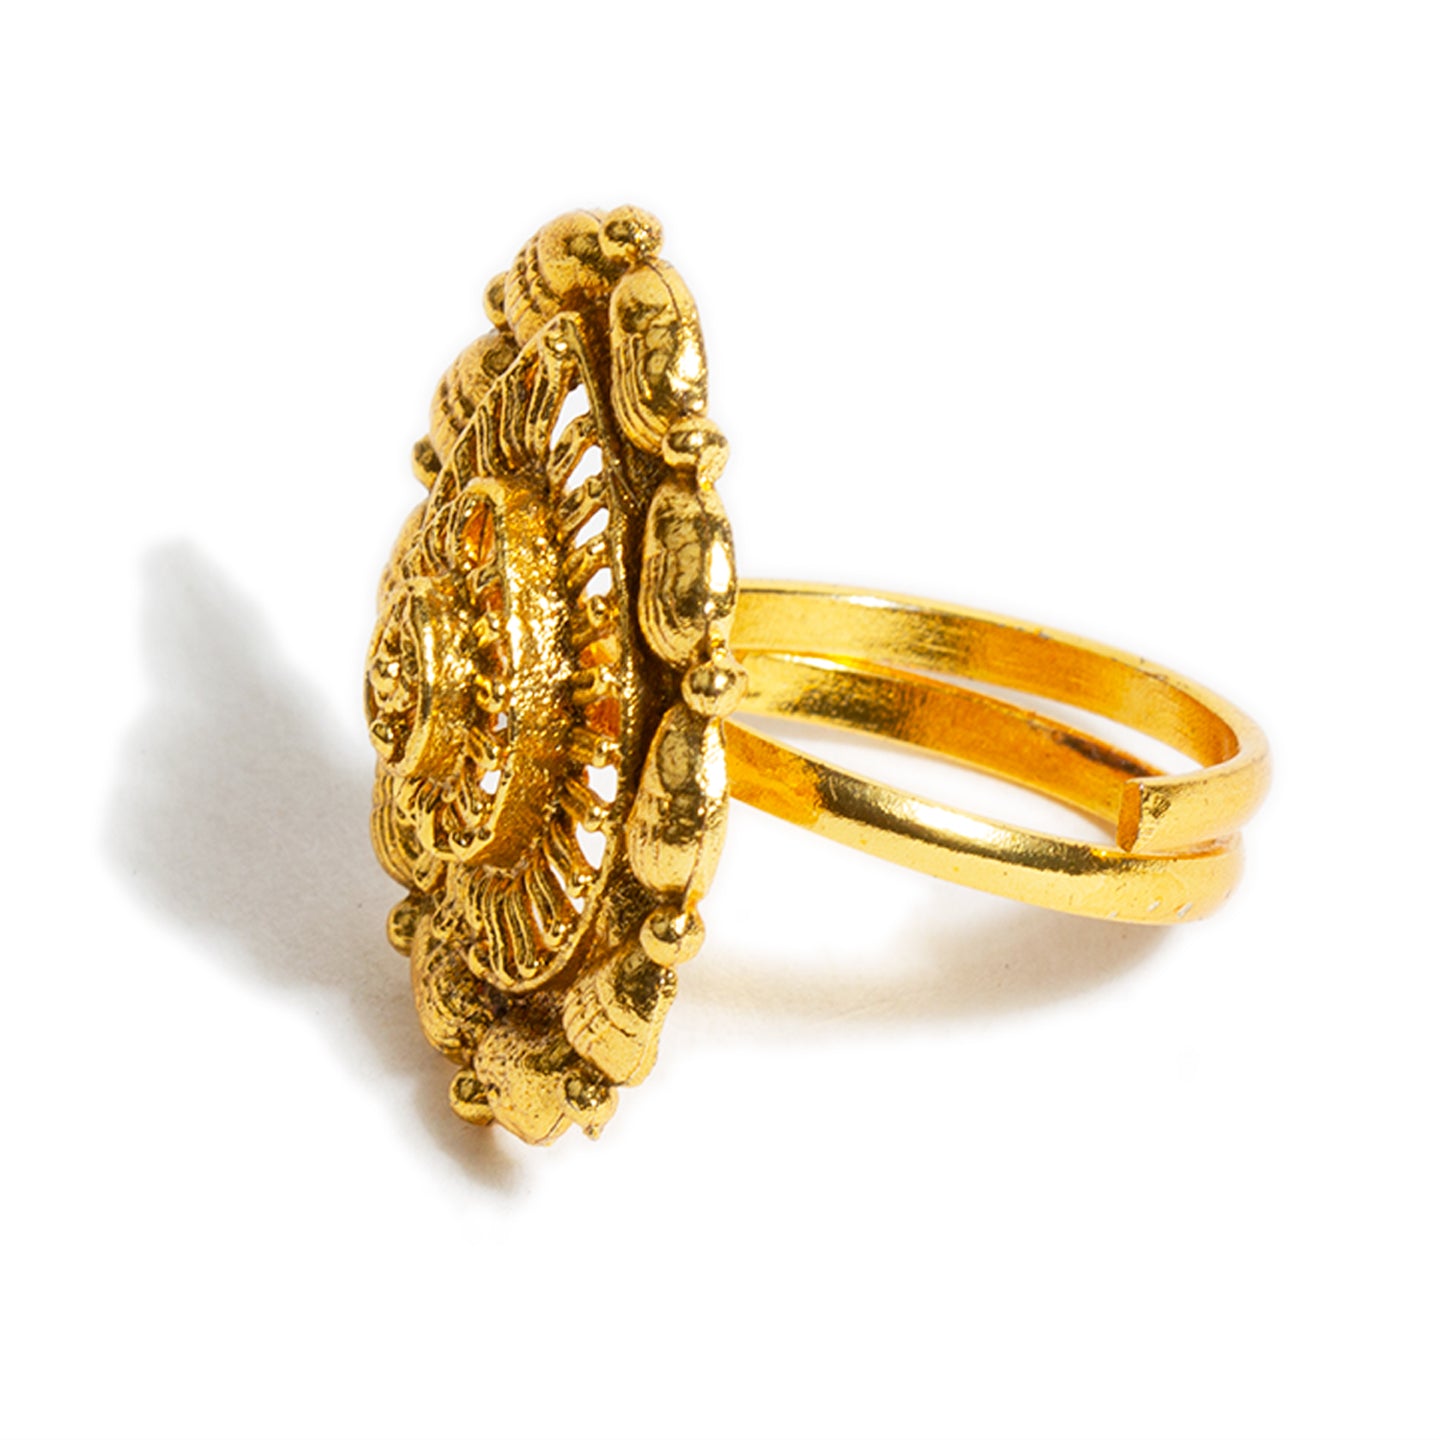 The Symbolic Meaning of a Ring on a Finger | Givingtreegallery.com